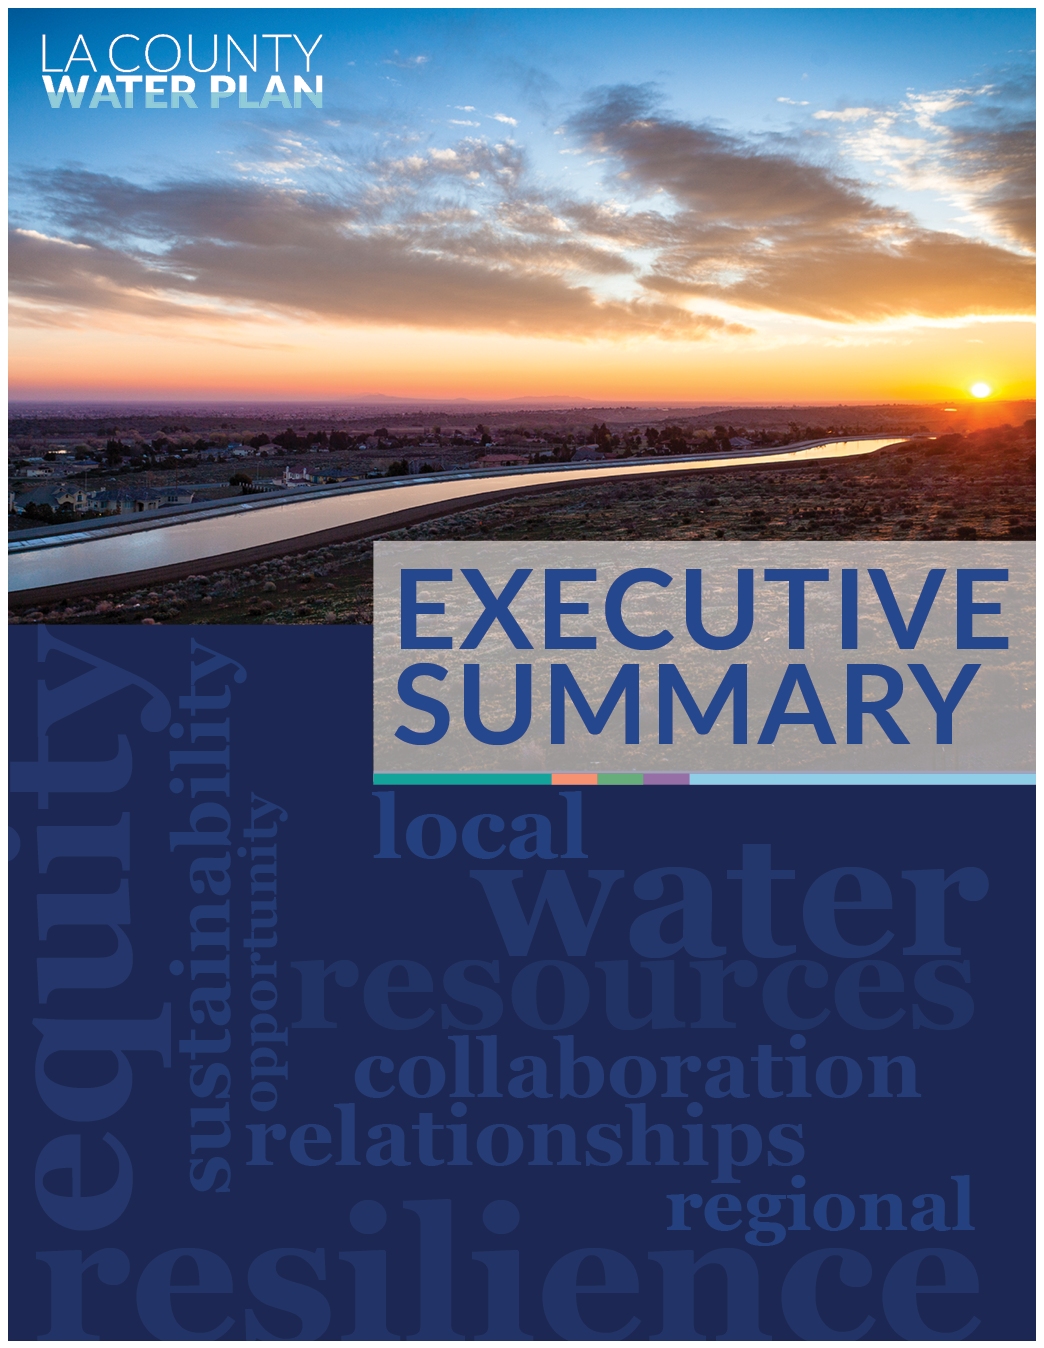 Thumbnail of the LA County Water Plan Executive Summary.  The top half of the cover has a picture of a sunset over a canal and the LA County Water Plan logo in the top left corner. The bottom half of the cover has words that describe the LA County Water Plan.   